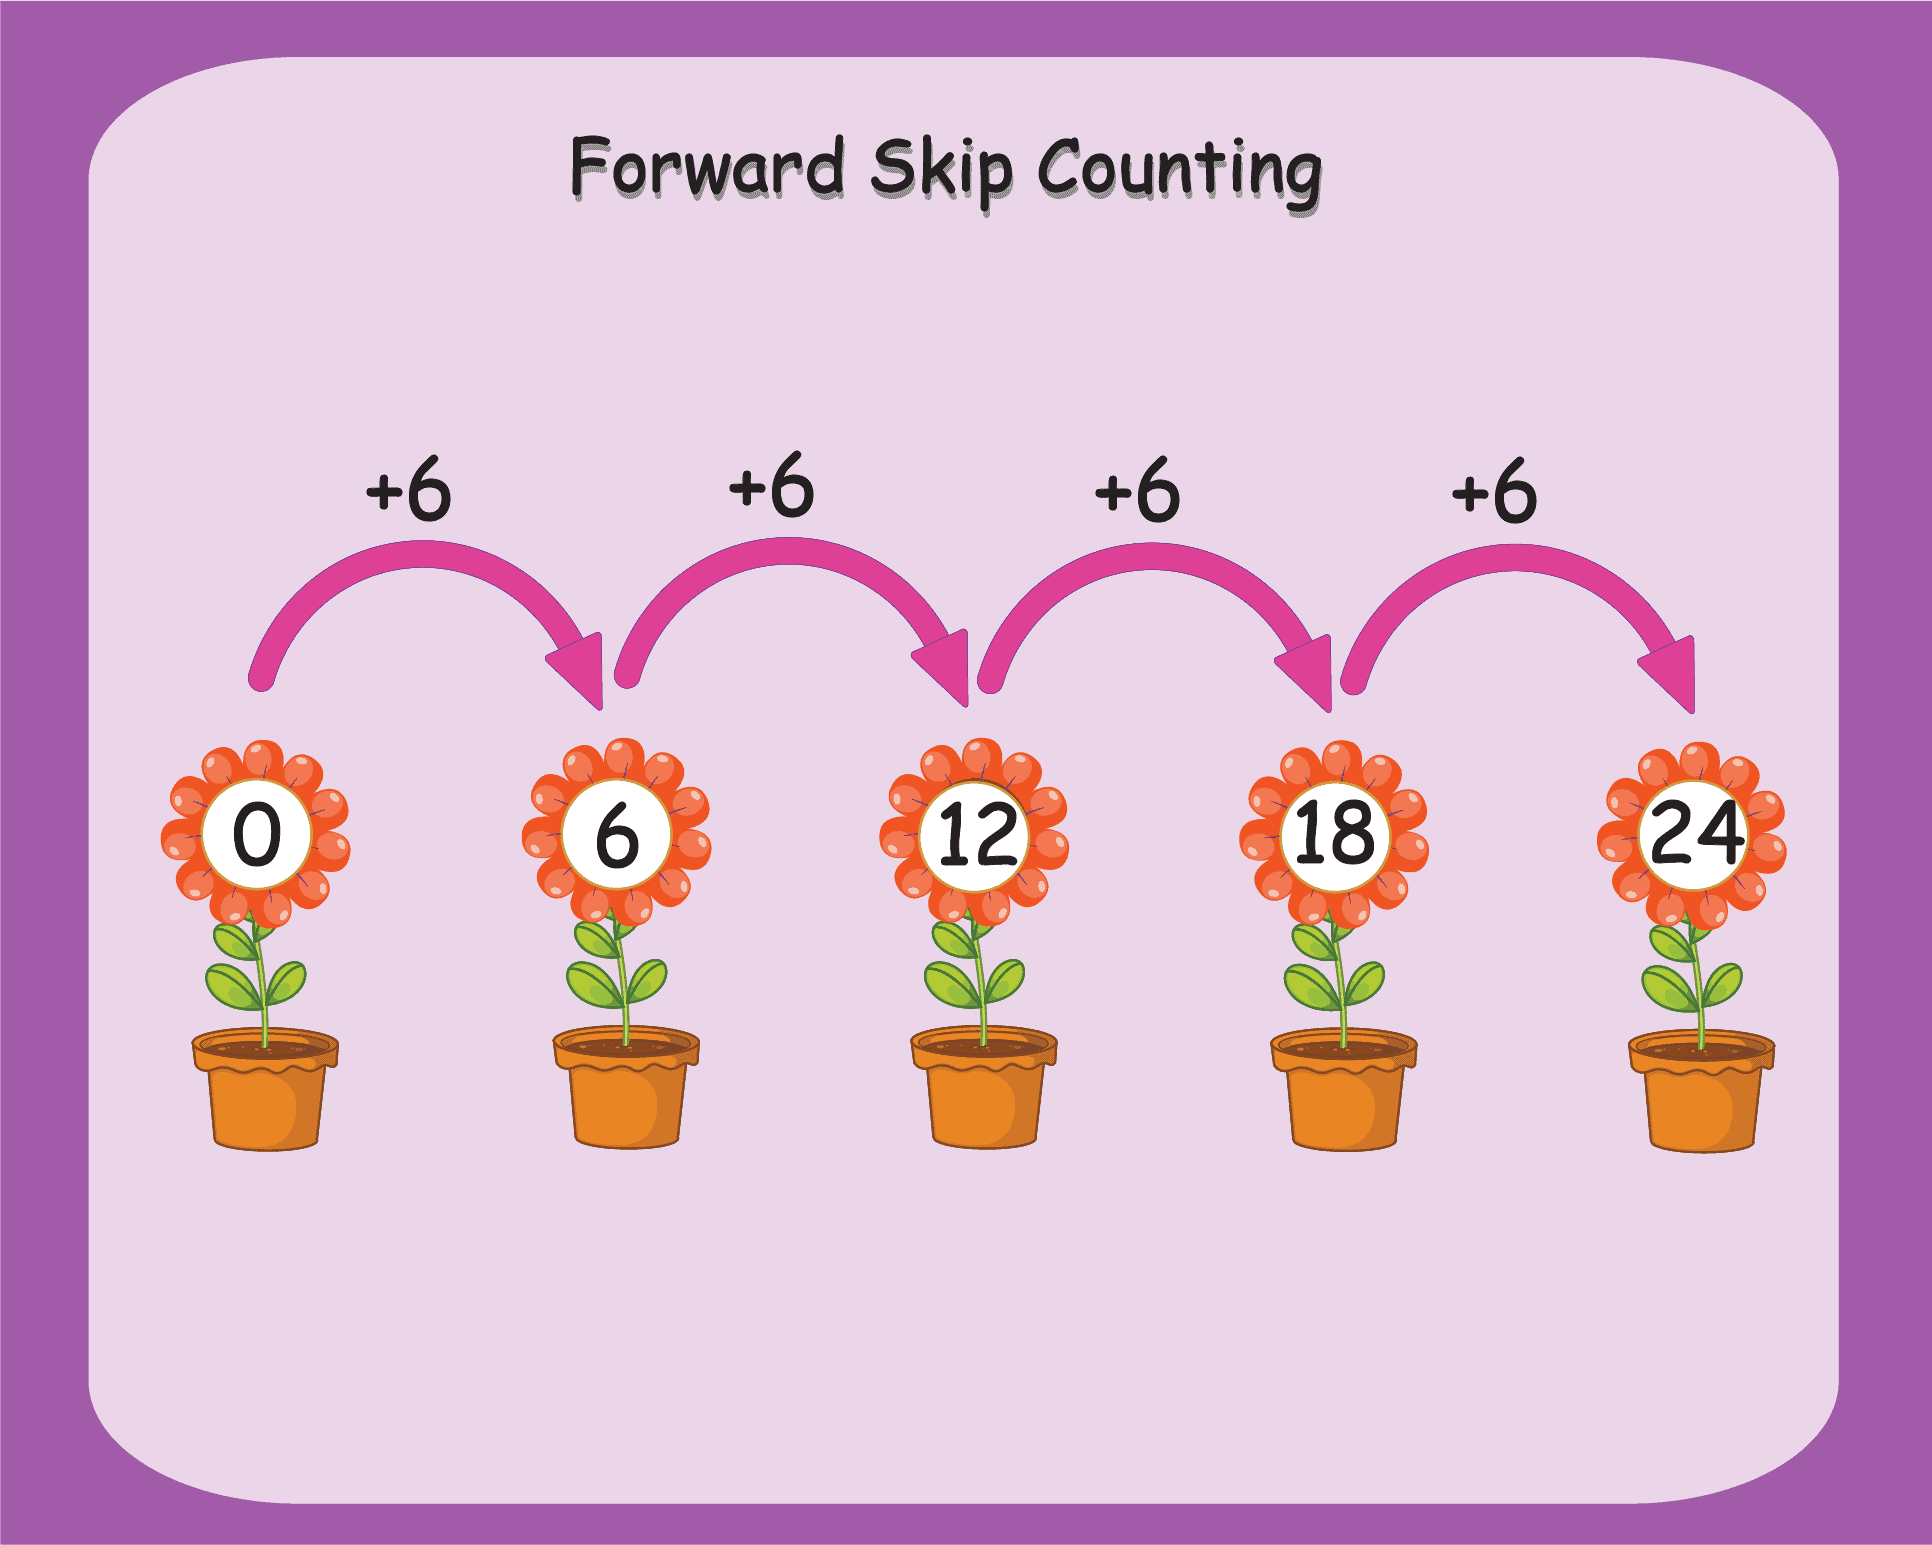 Forward skip counting overview